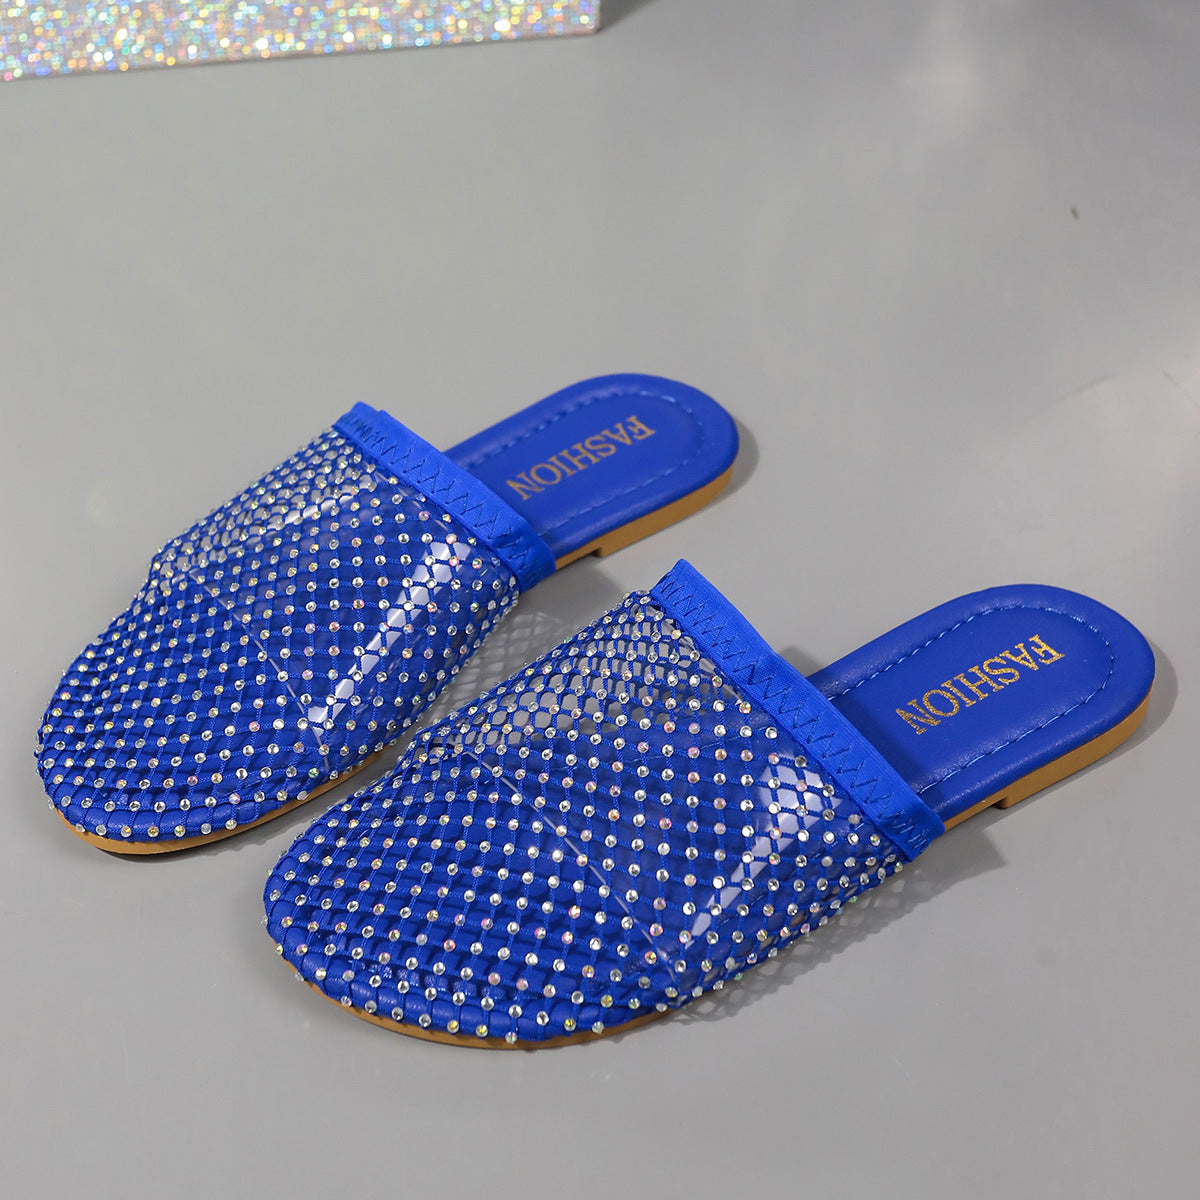 Hollow-toe Transparent Hollow Sandals With Rhinestones Summer Fashion Outdoor Slippers Flat Shoes For Women